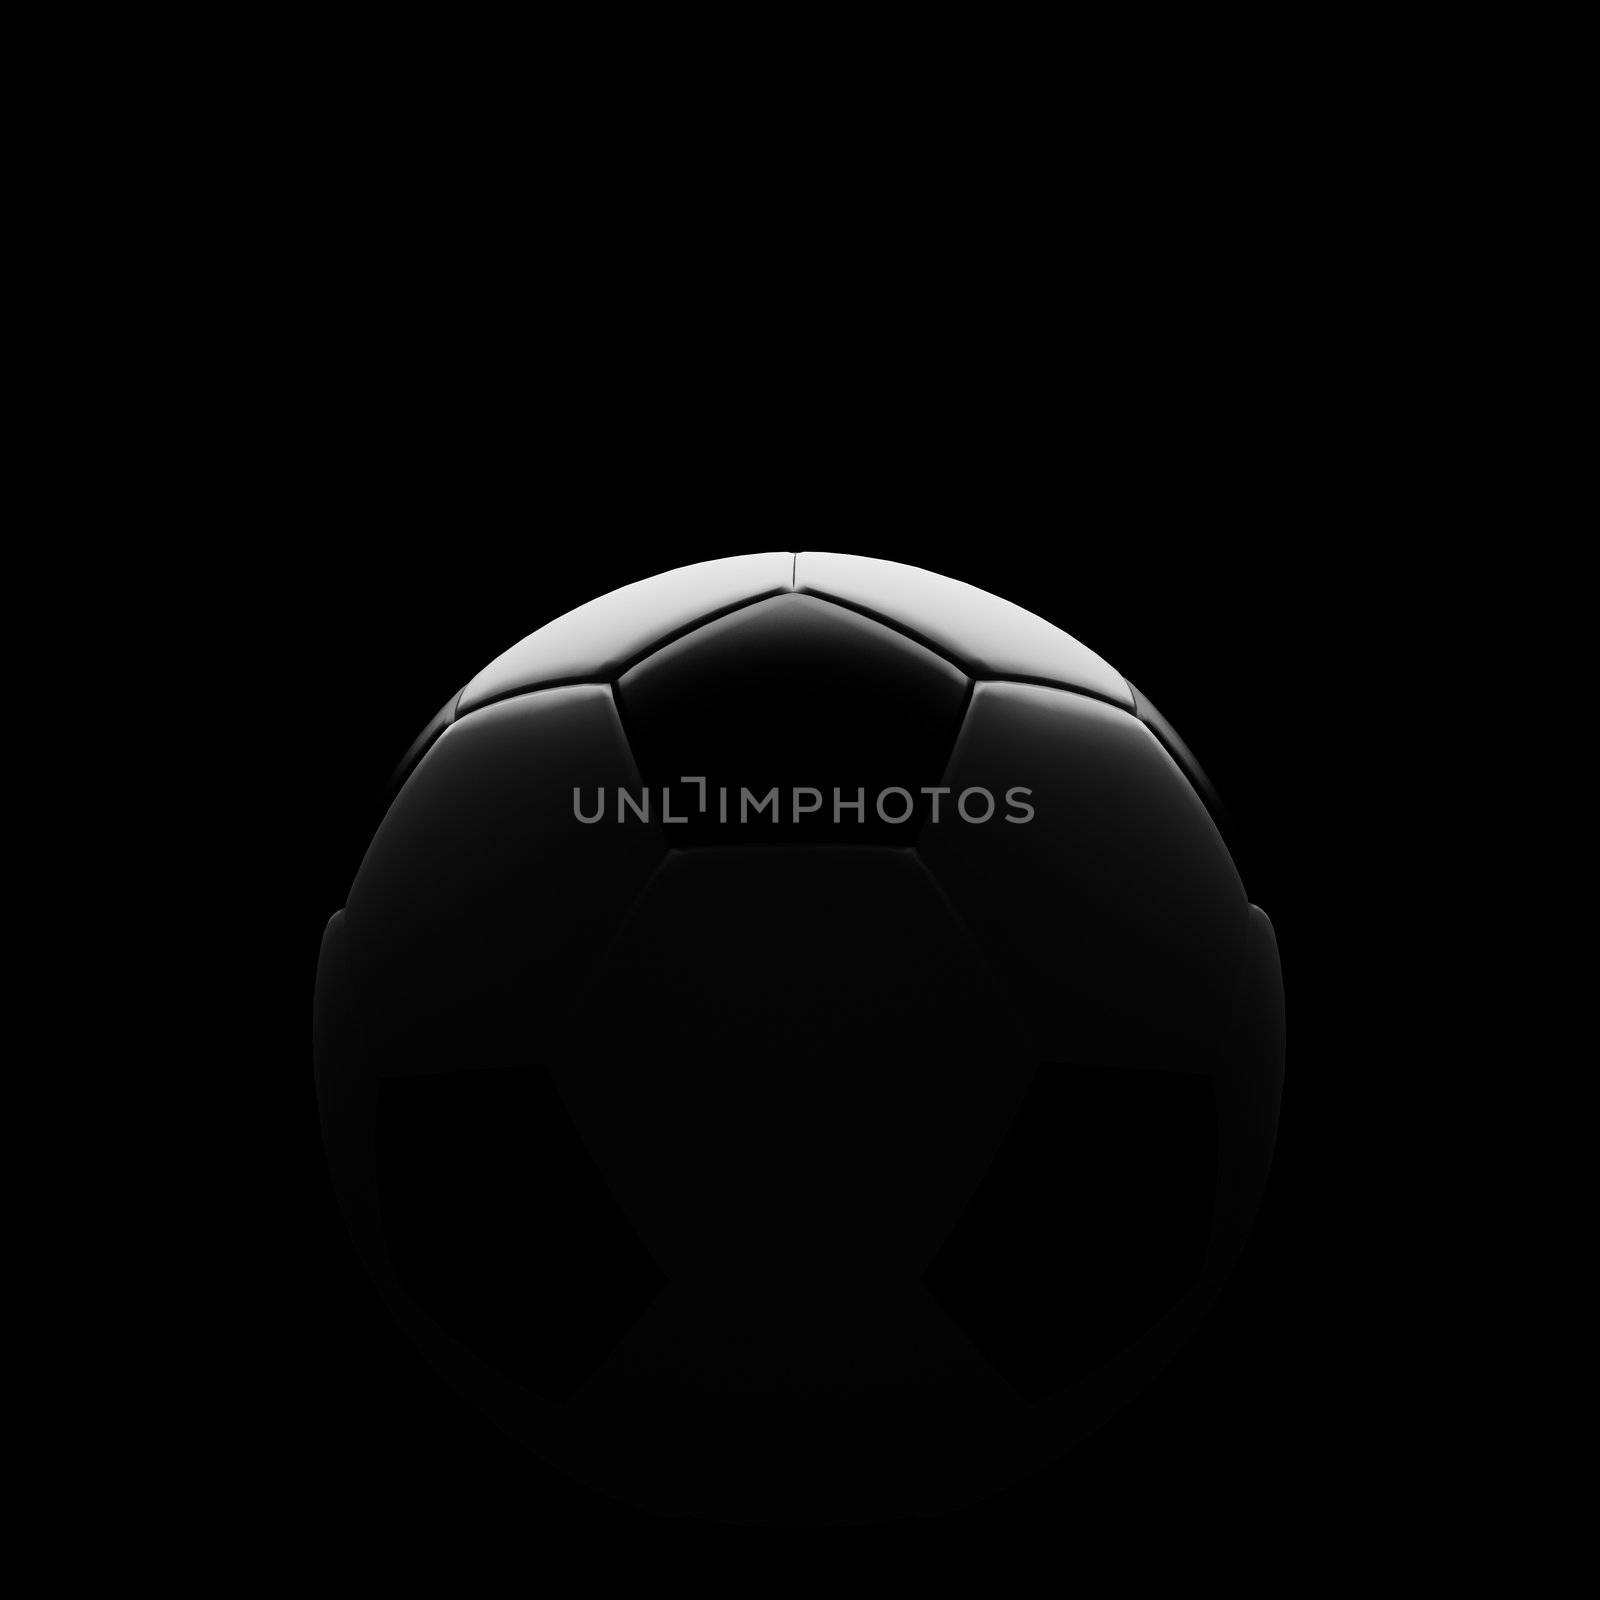 Soccer ball on black with beautiful back lighting